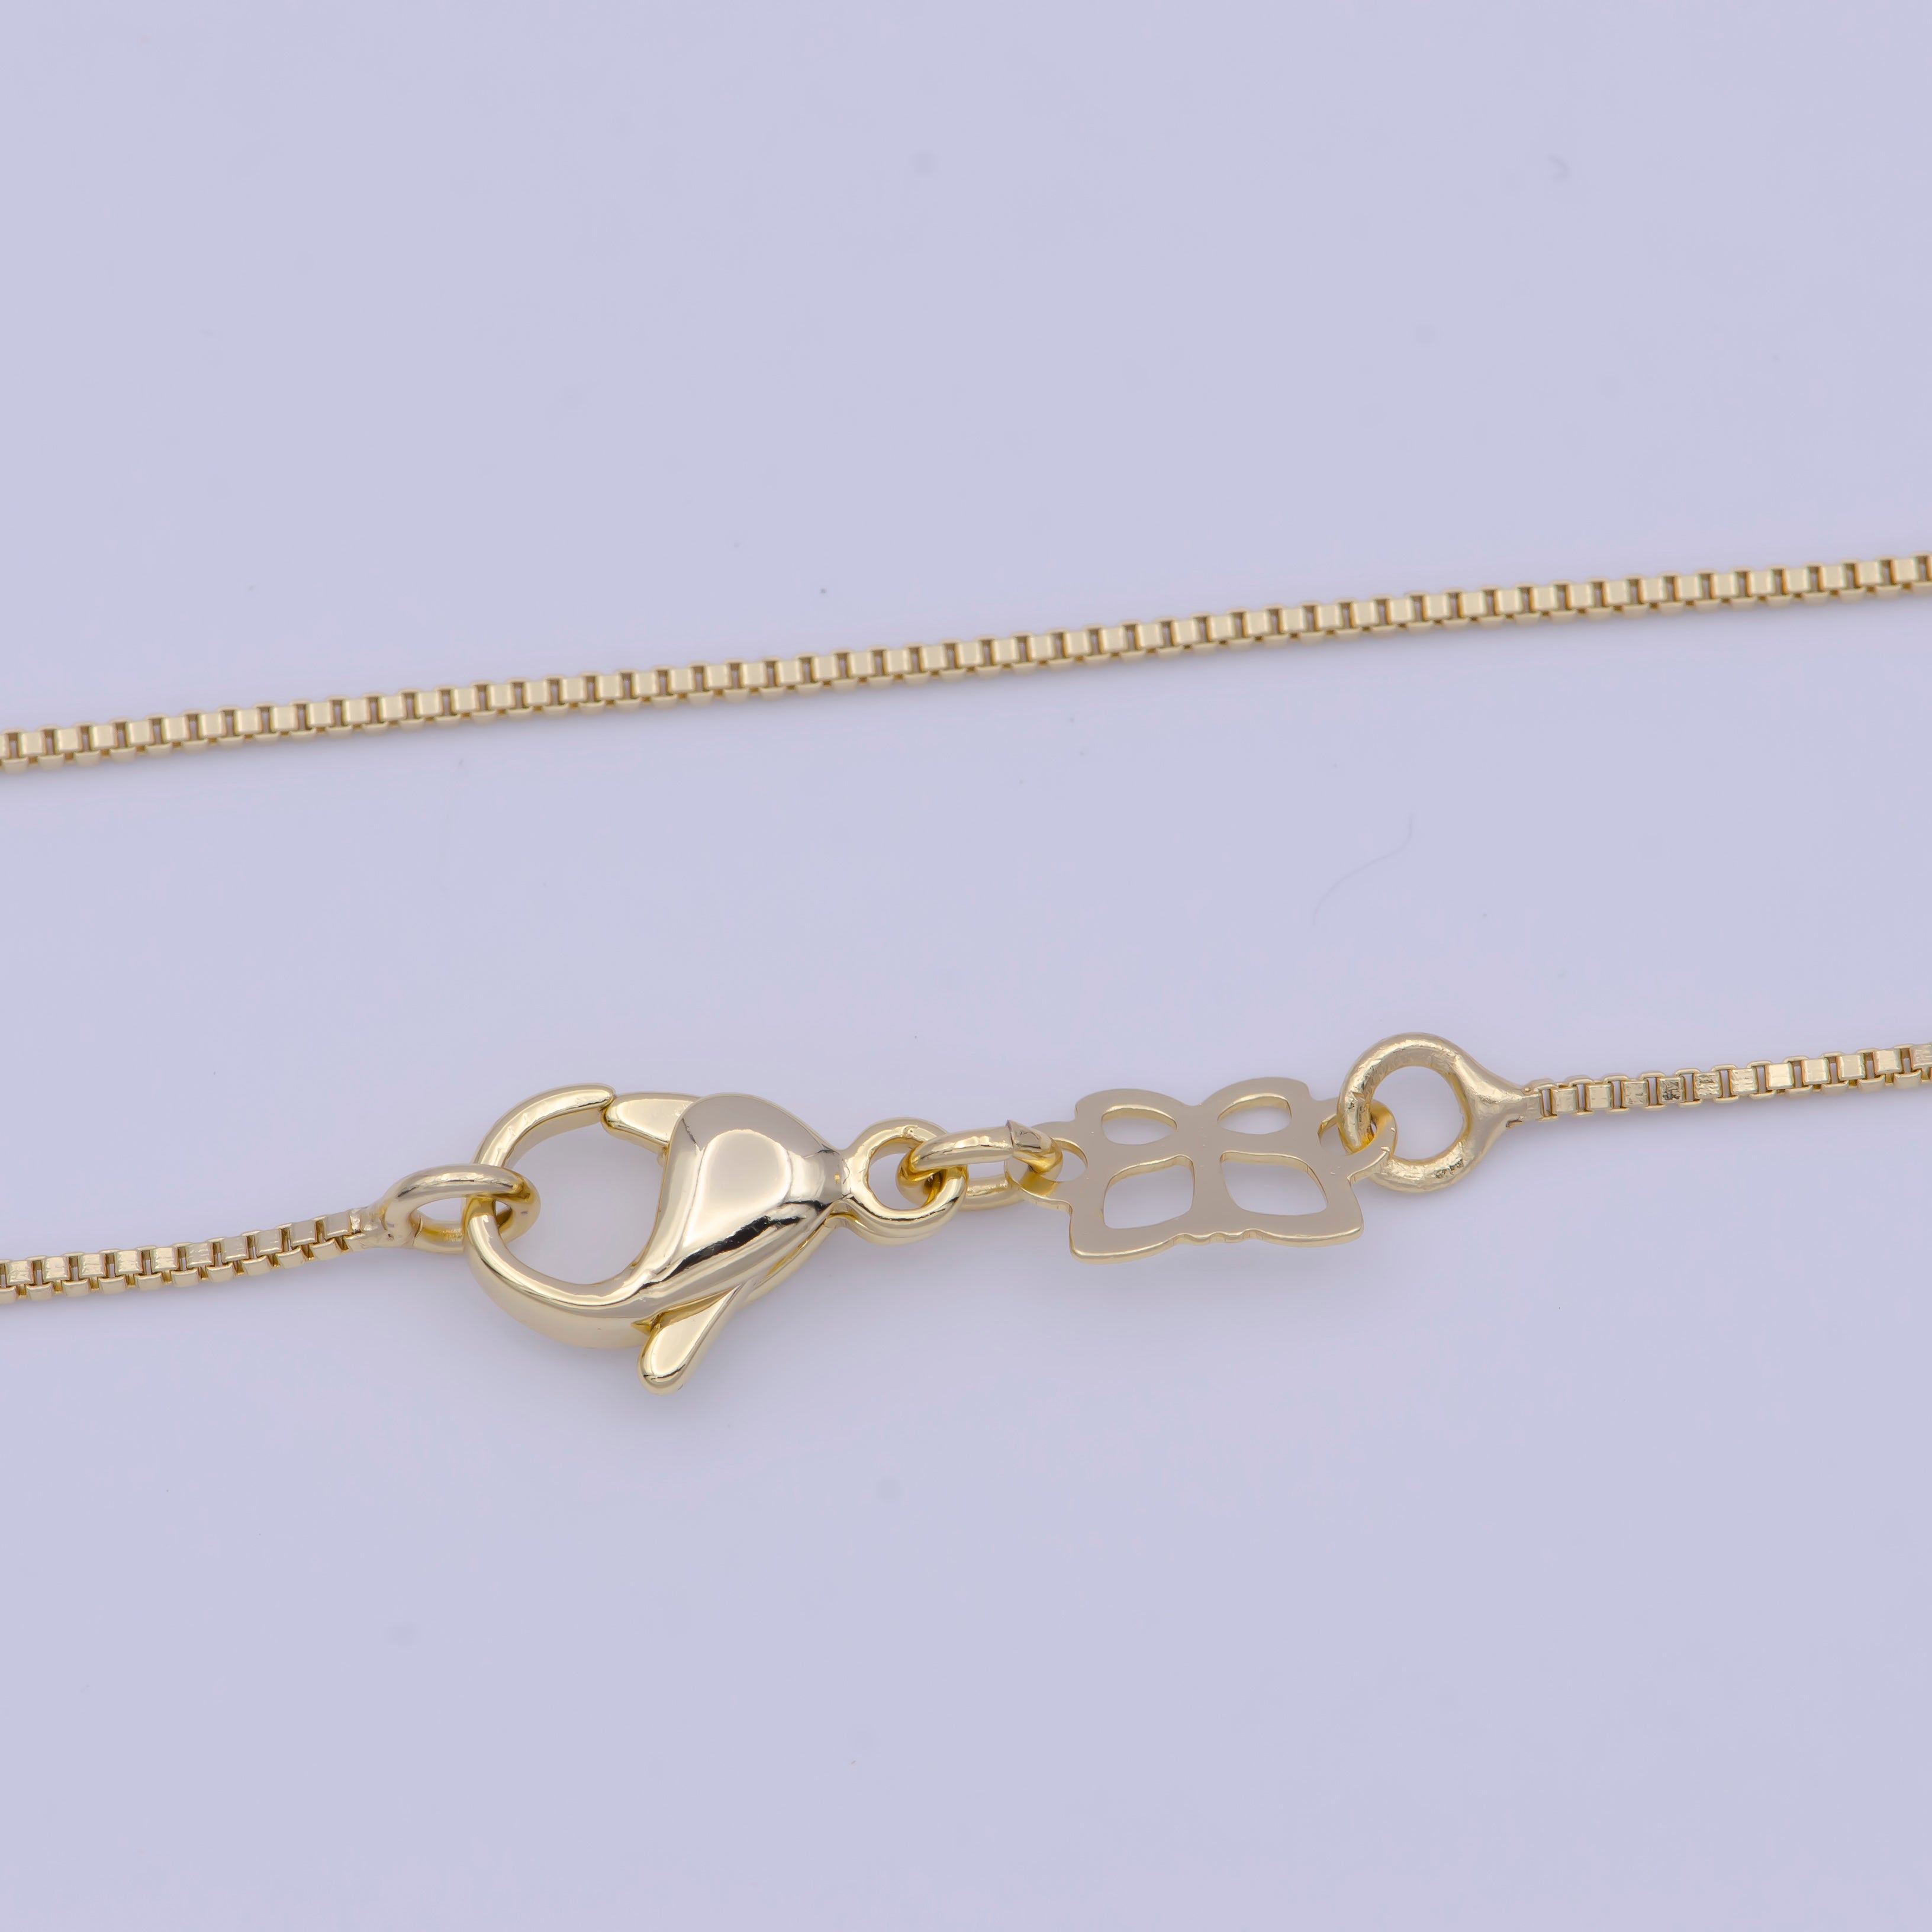 Dainty Box Chain 14k Gold Filled Box Chain, Everyday Jewelry, Essential Layering Chain Ready To wear Necklace WA-1111 - DLUXCA